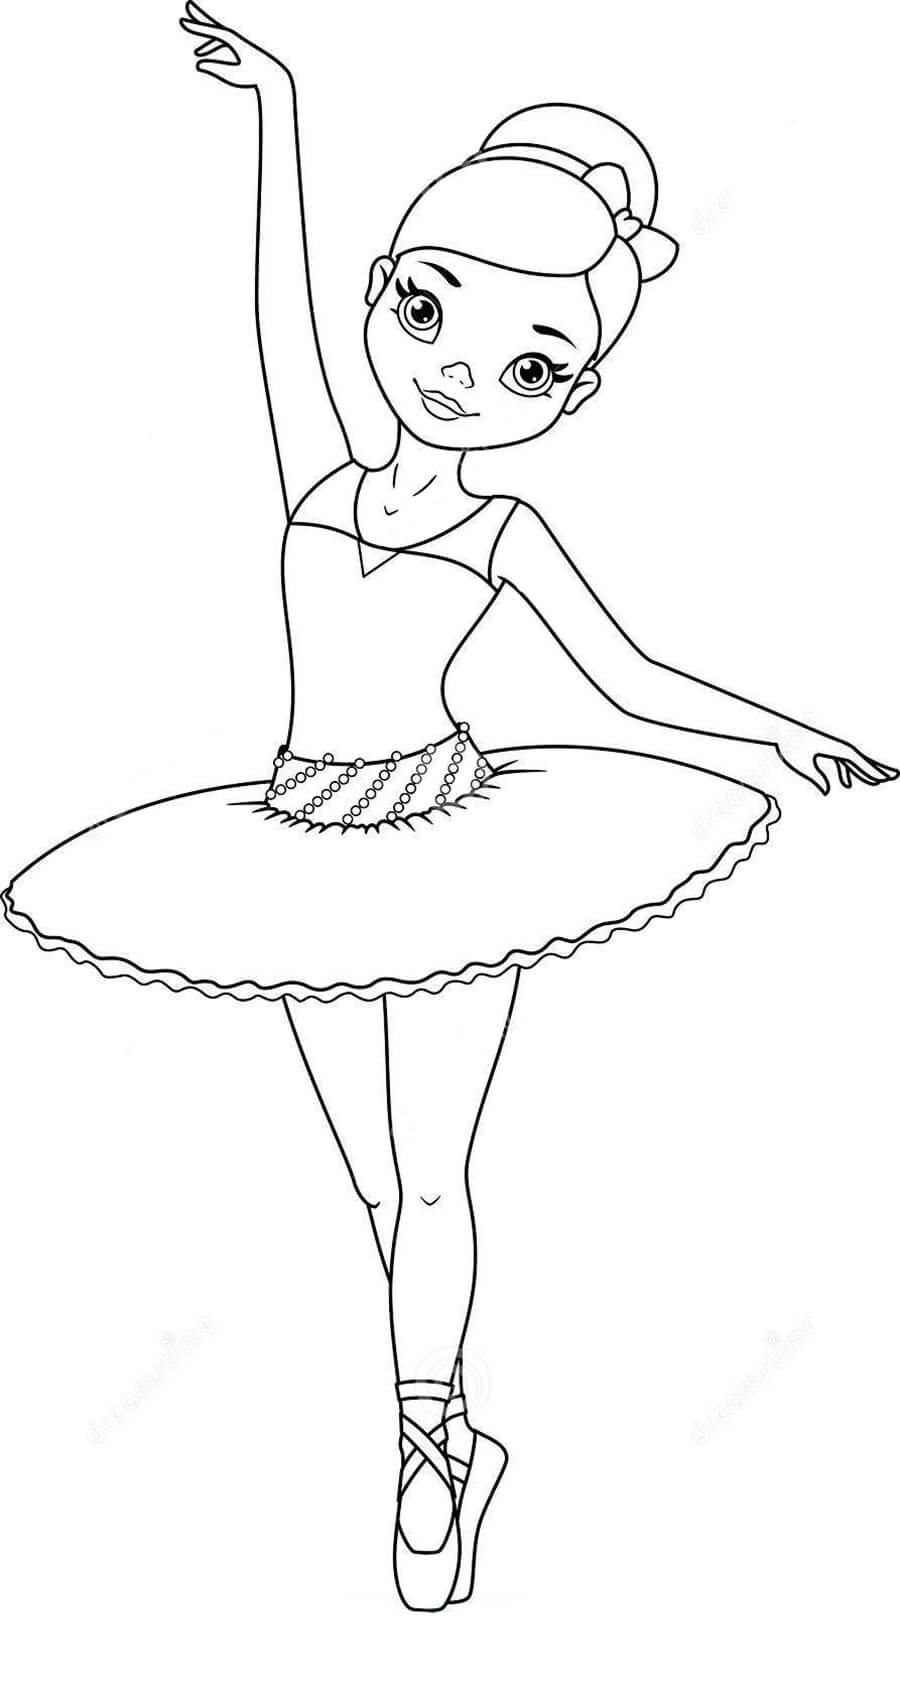 Cute Ballerina Coloring Page   Free Printable Coloring Pages for Kids